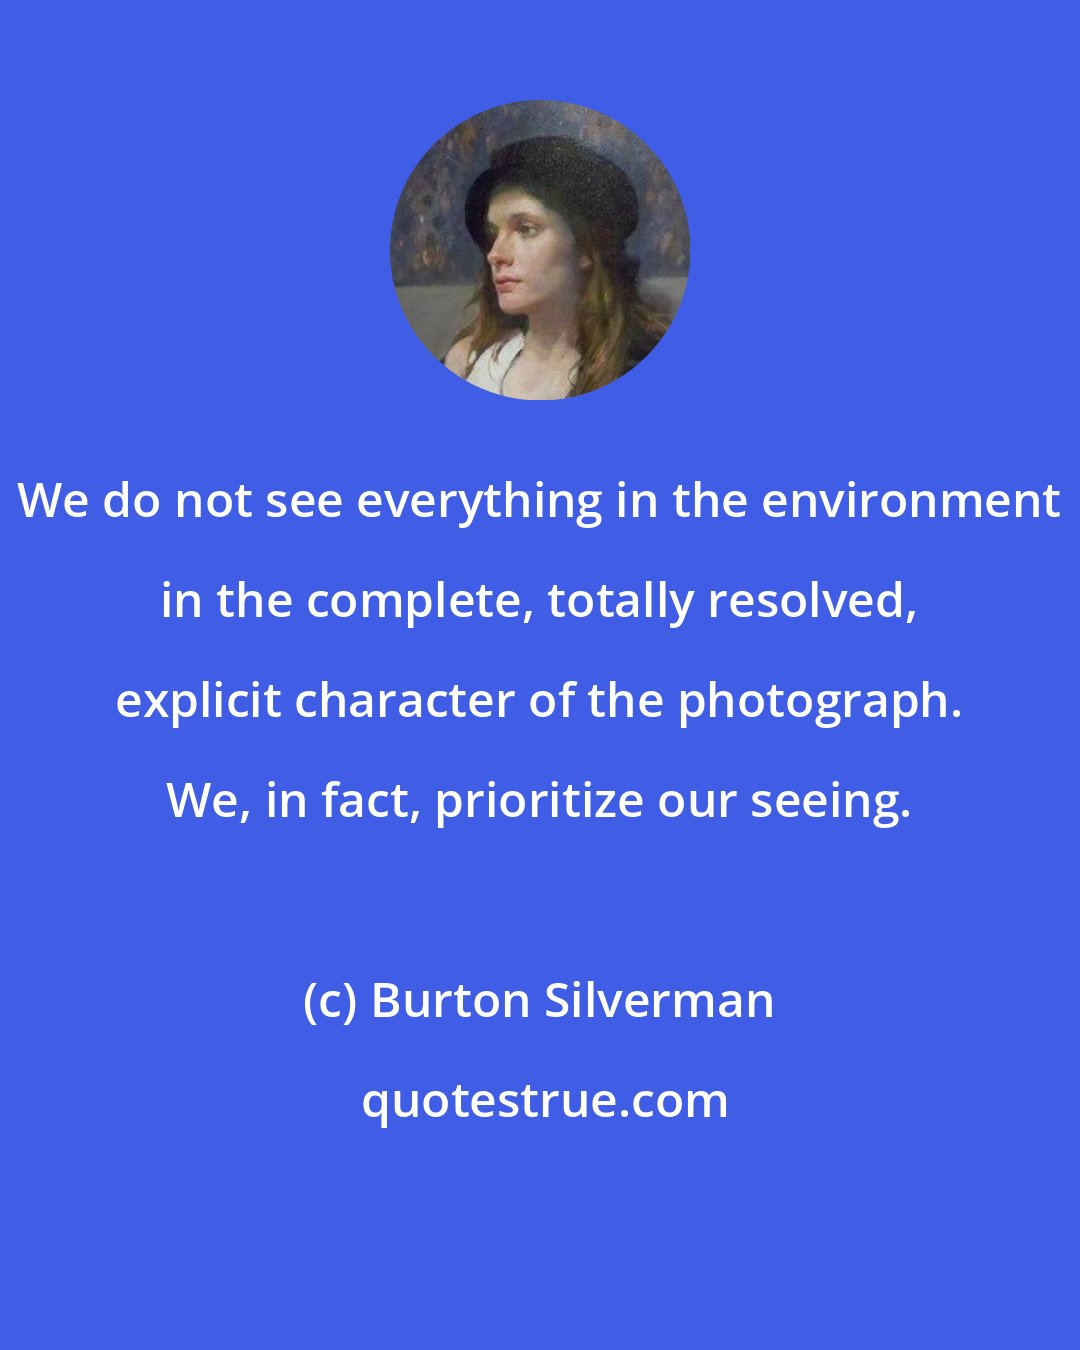 Burton Silverman: We do not see everything in the environment in the complete, totally resolved, explicit character of the photograph. We, in fact, prioritize our seeing.